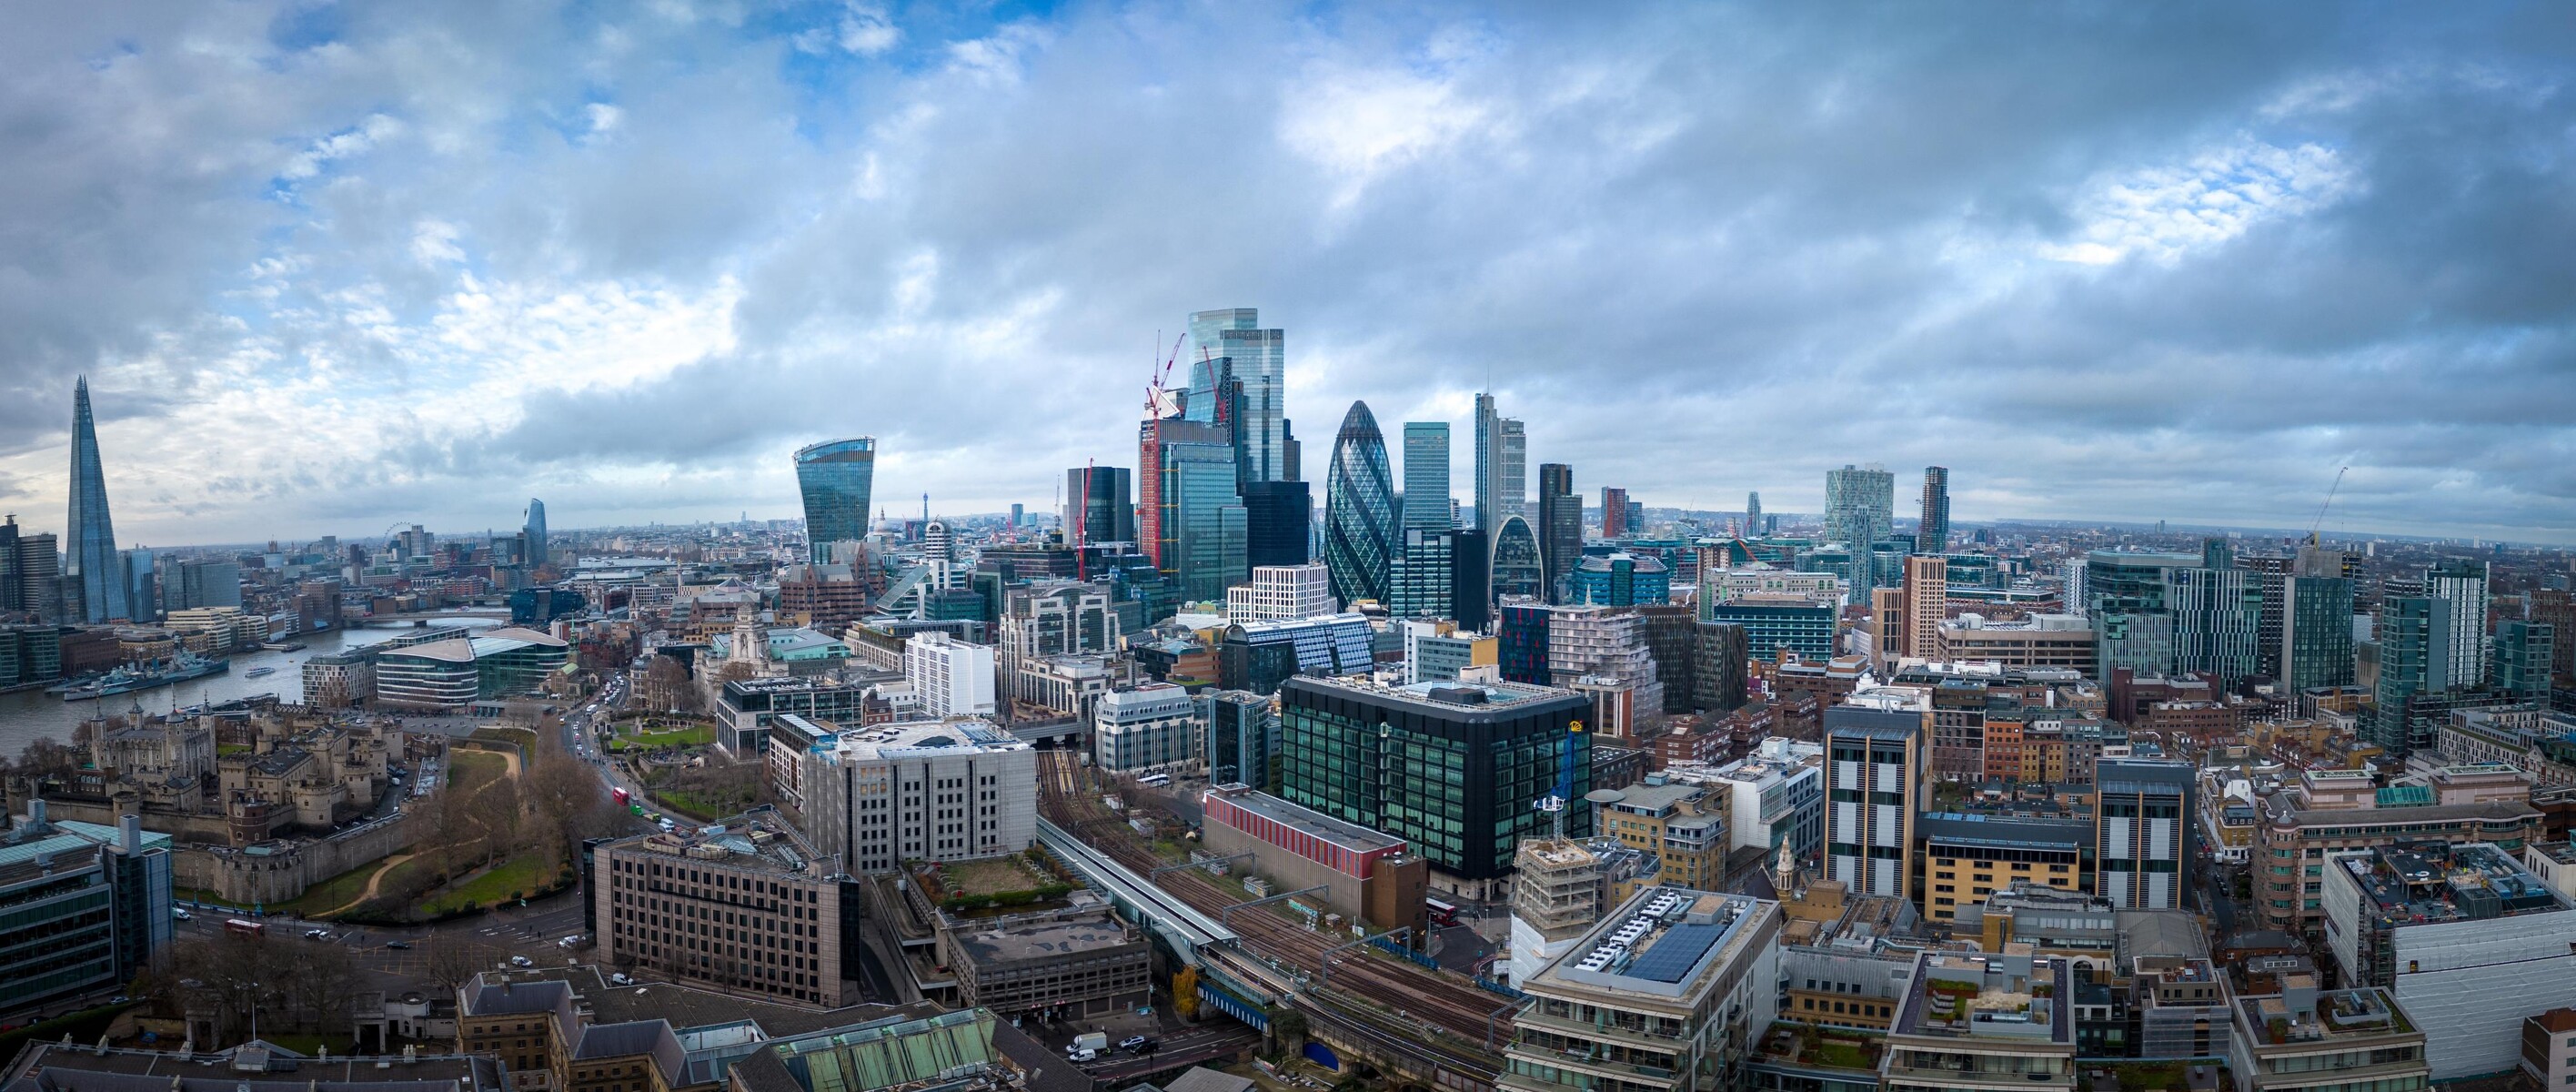 View of the megacity London